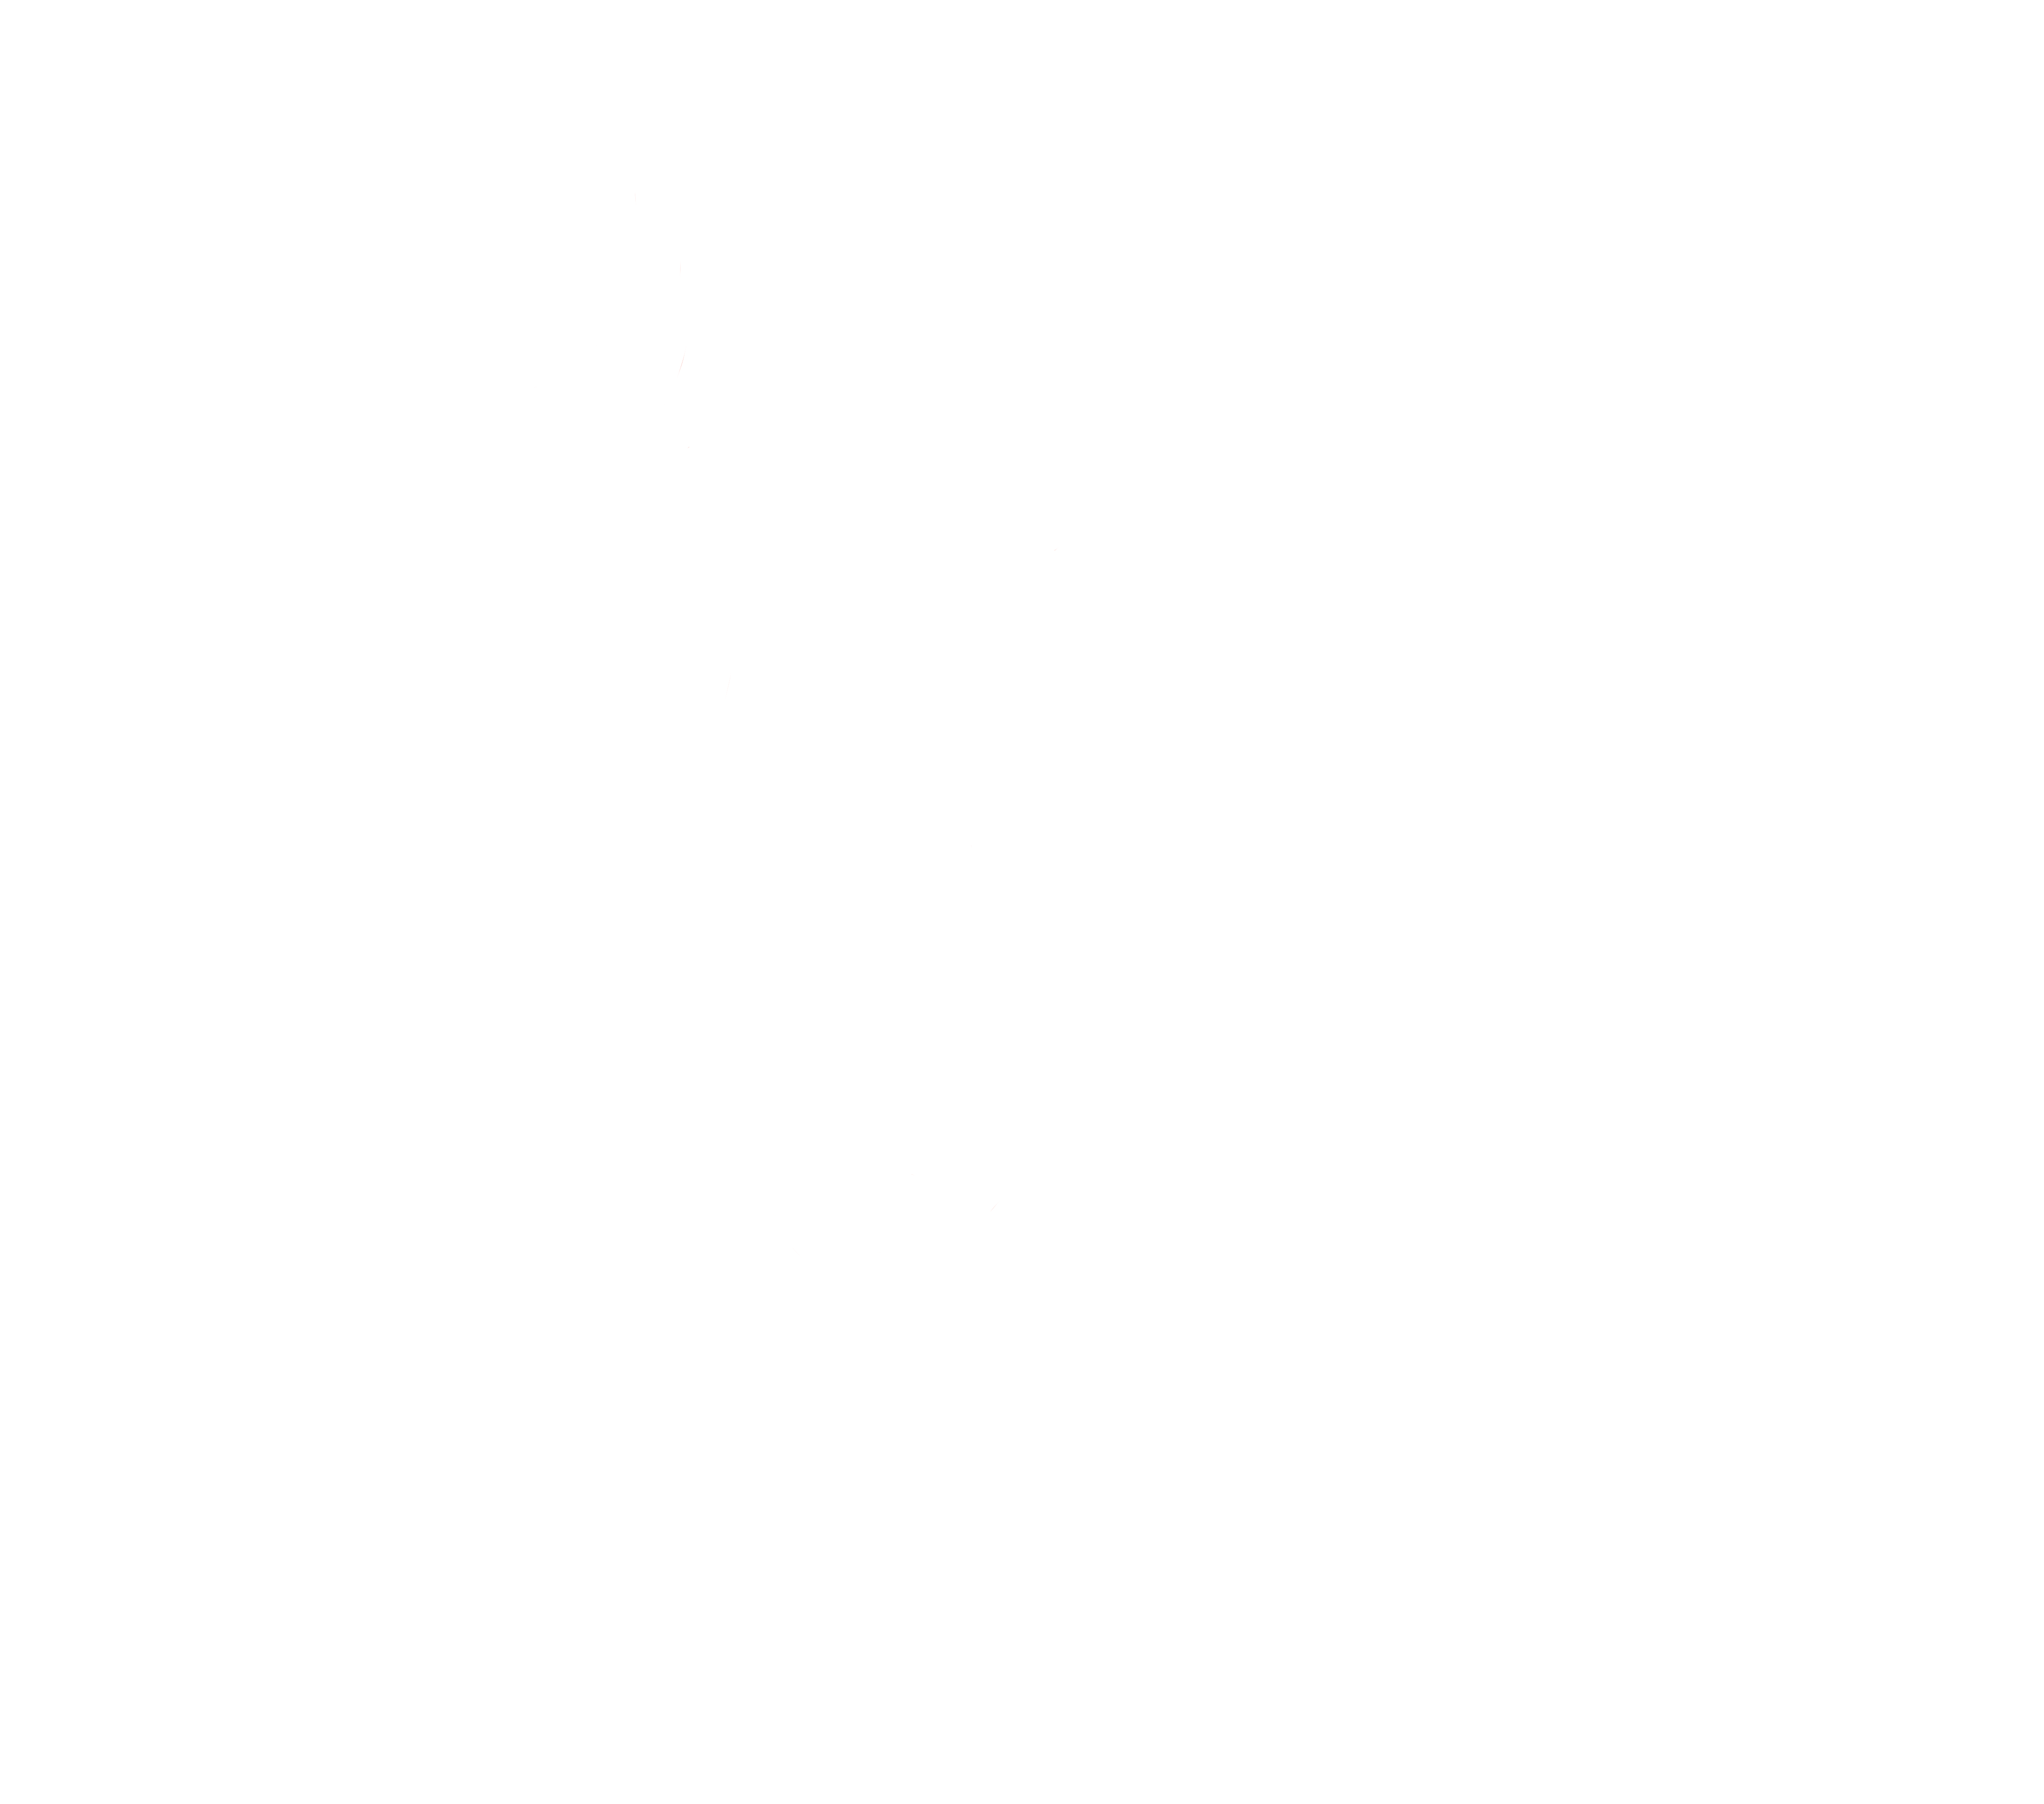 A white spiderweb with 2019 spelled out in the web and a spider hanging by a thread from the bottom right.